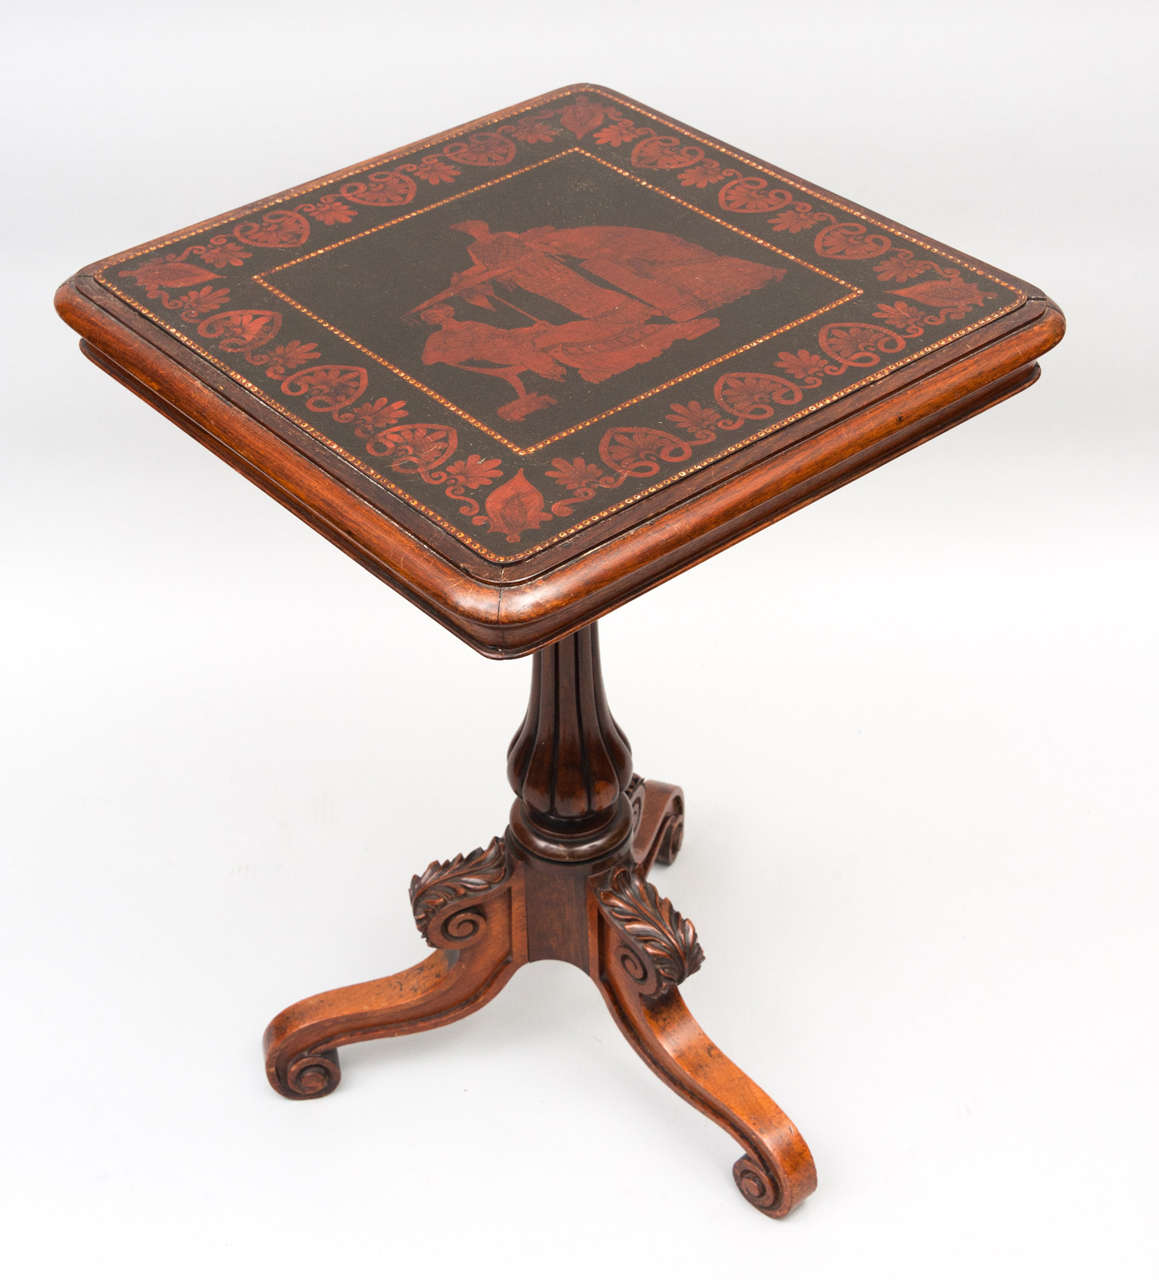 A late Regency rosewood unusual occasional table with the original painted decorated top, featuring a classical scene of two maidens attending a lady, within an anthemion border, set into a rosewood frame. The base on a fluted baluster support and